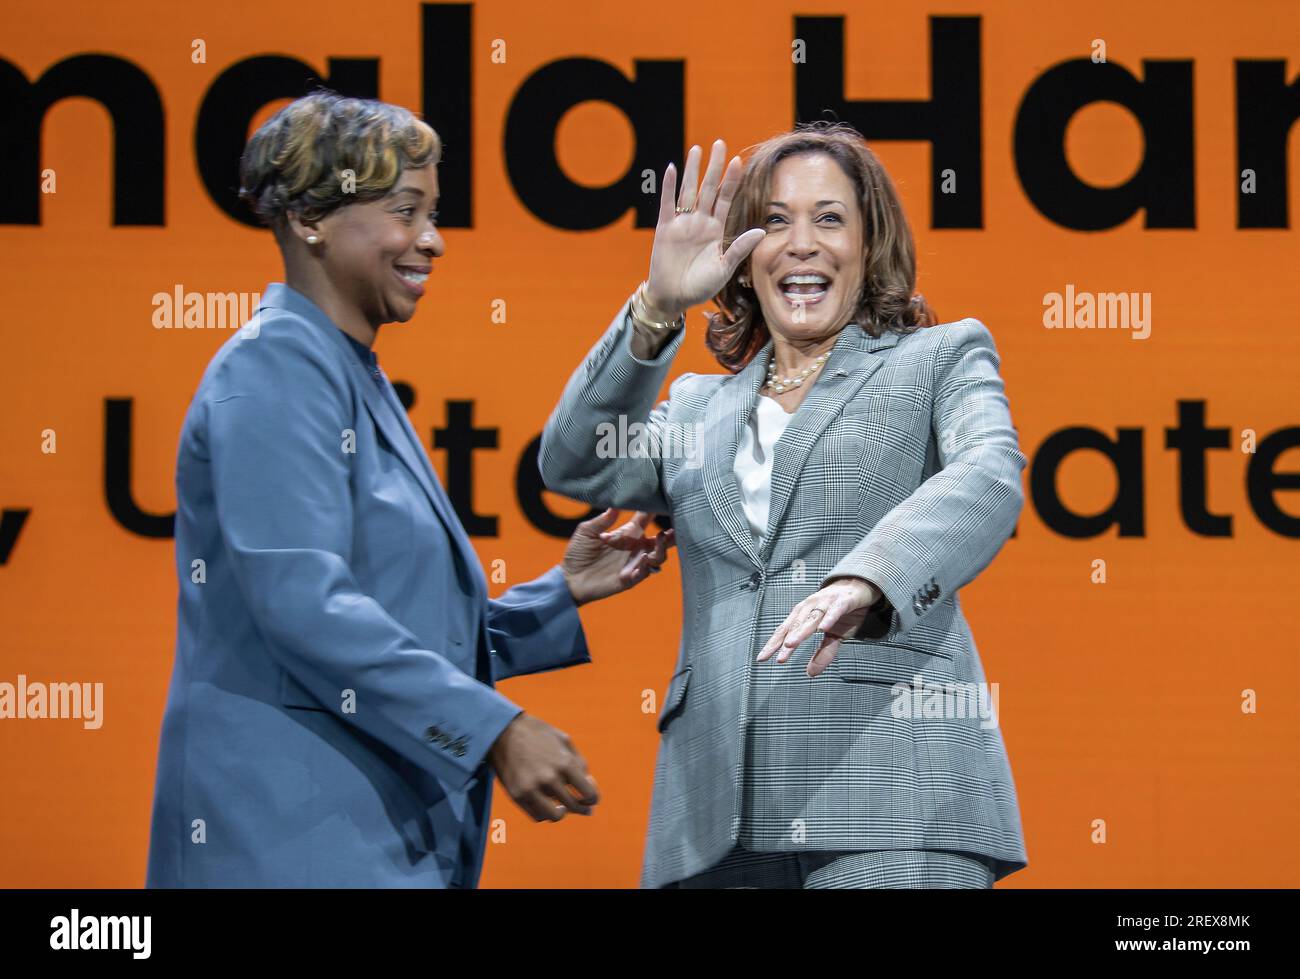 Boston, Massachussetts, USA. 29th July 2023. United States Vice President Kamala Harris, right, arrives to deliver remarks at the 2023 NAACP National Convention in Boston, Massachusetts with Massachusetts Attorney General Andrea Campbell, left, on Saturday, July 29, 2023.Credit: Rick Friedman/Pool via CNP /MediaPunch Credit: MediaPunch Inc/Alamy Live News Stock Photo